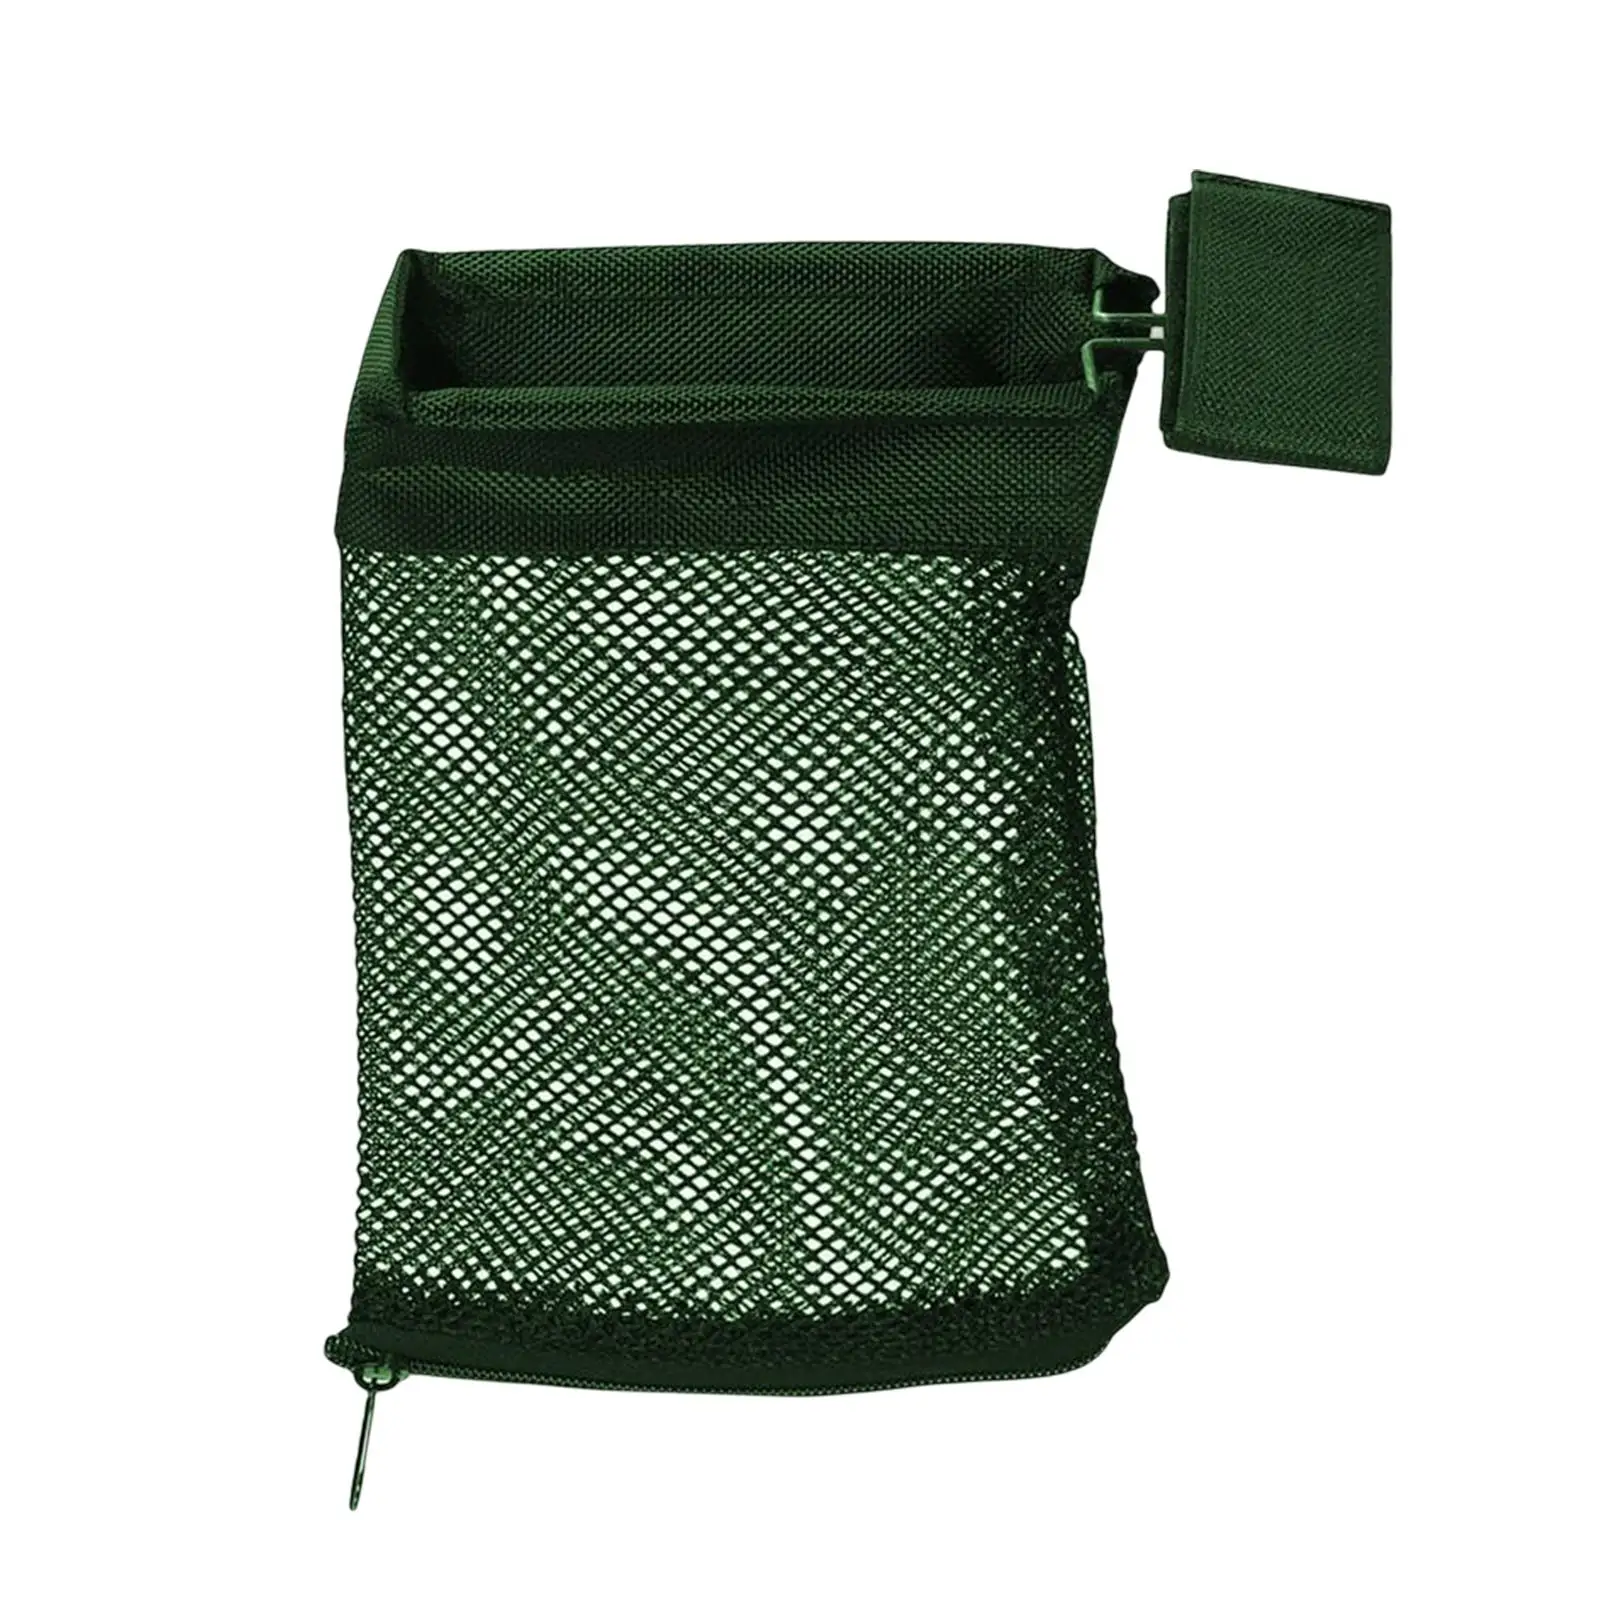 Mesh Recycling Bag Cosmetic Pouch Collector Container Holder Lightweight Travel Case Storage Bags for Camping Outdoor Indoor